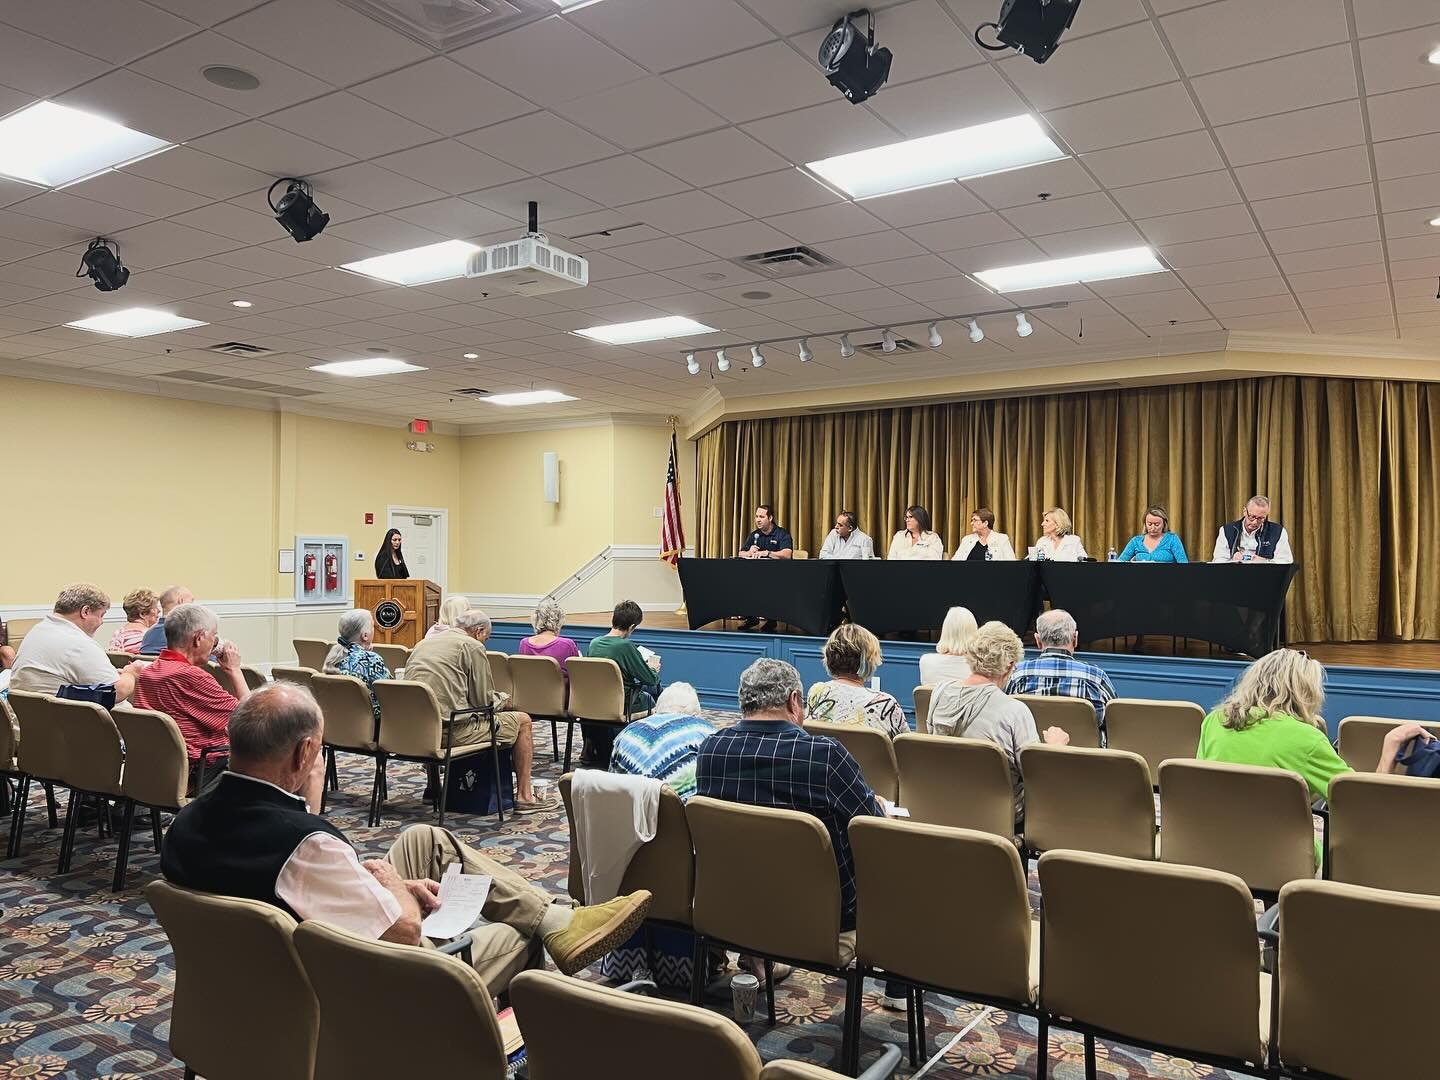 This morning we had the pleasure of speaking on a panel about Senior Moving and Downsizing at Indian River Estates 🏡  We take pride in assisting seniors with making their downsizing/moving transition stress-free! 

Thank you to all the service provi